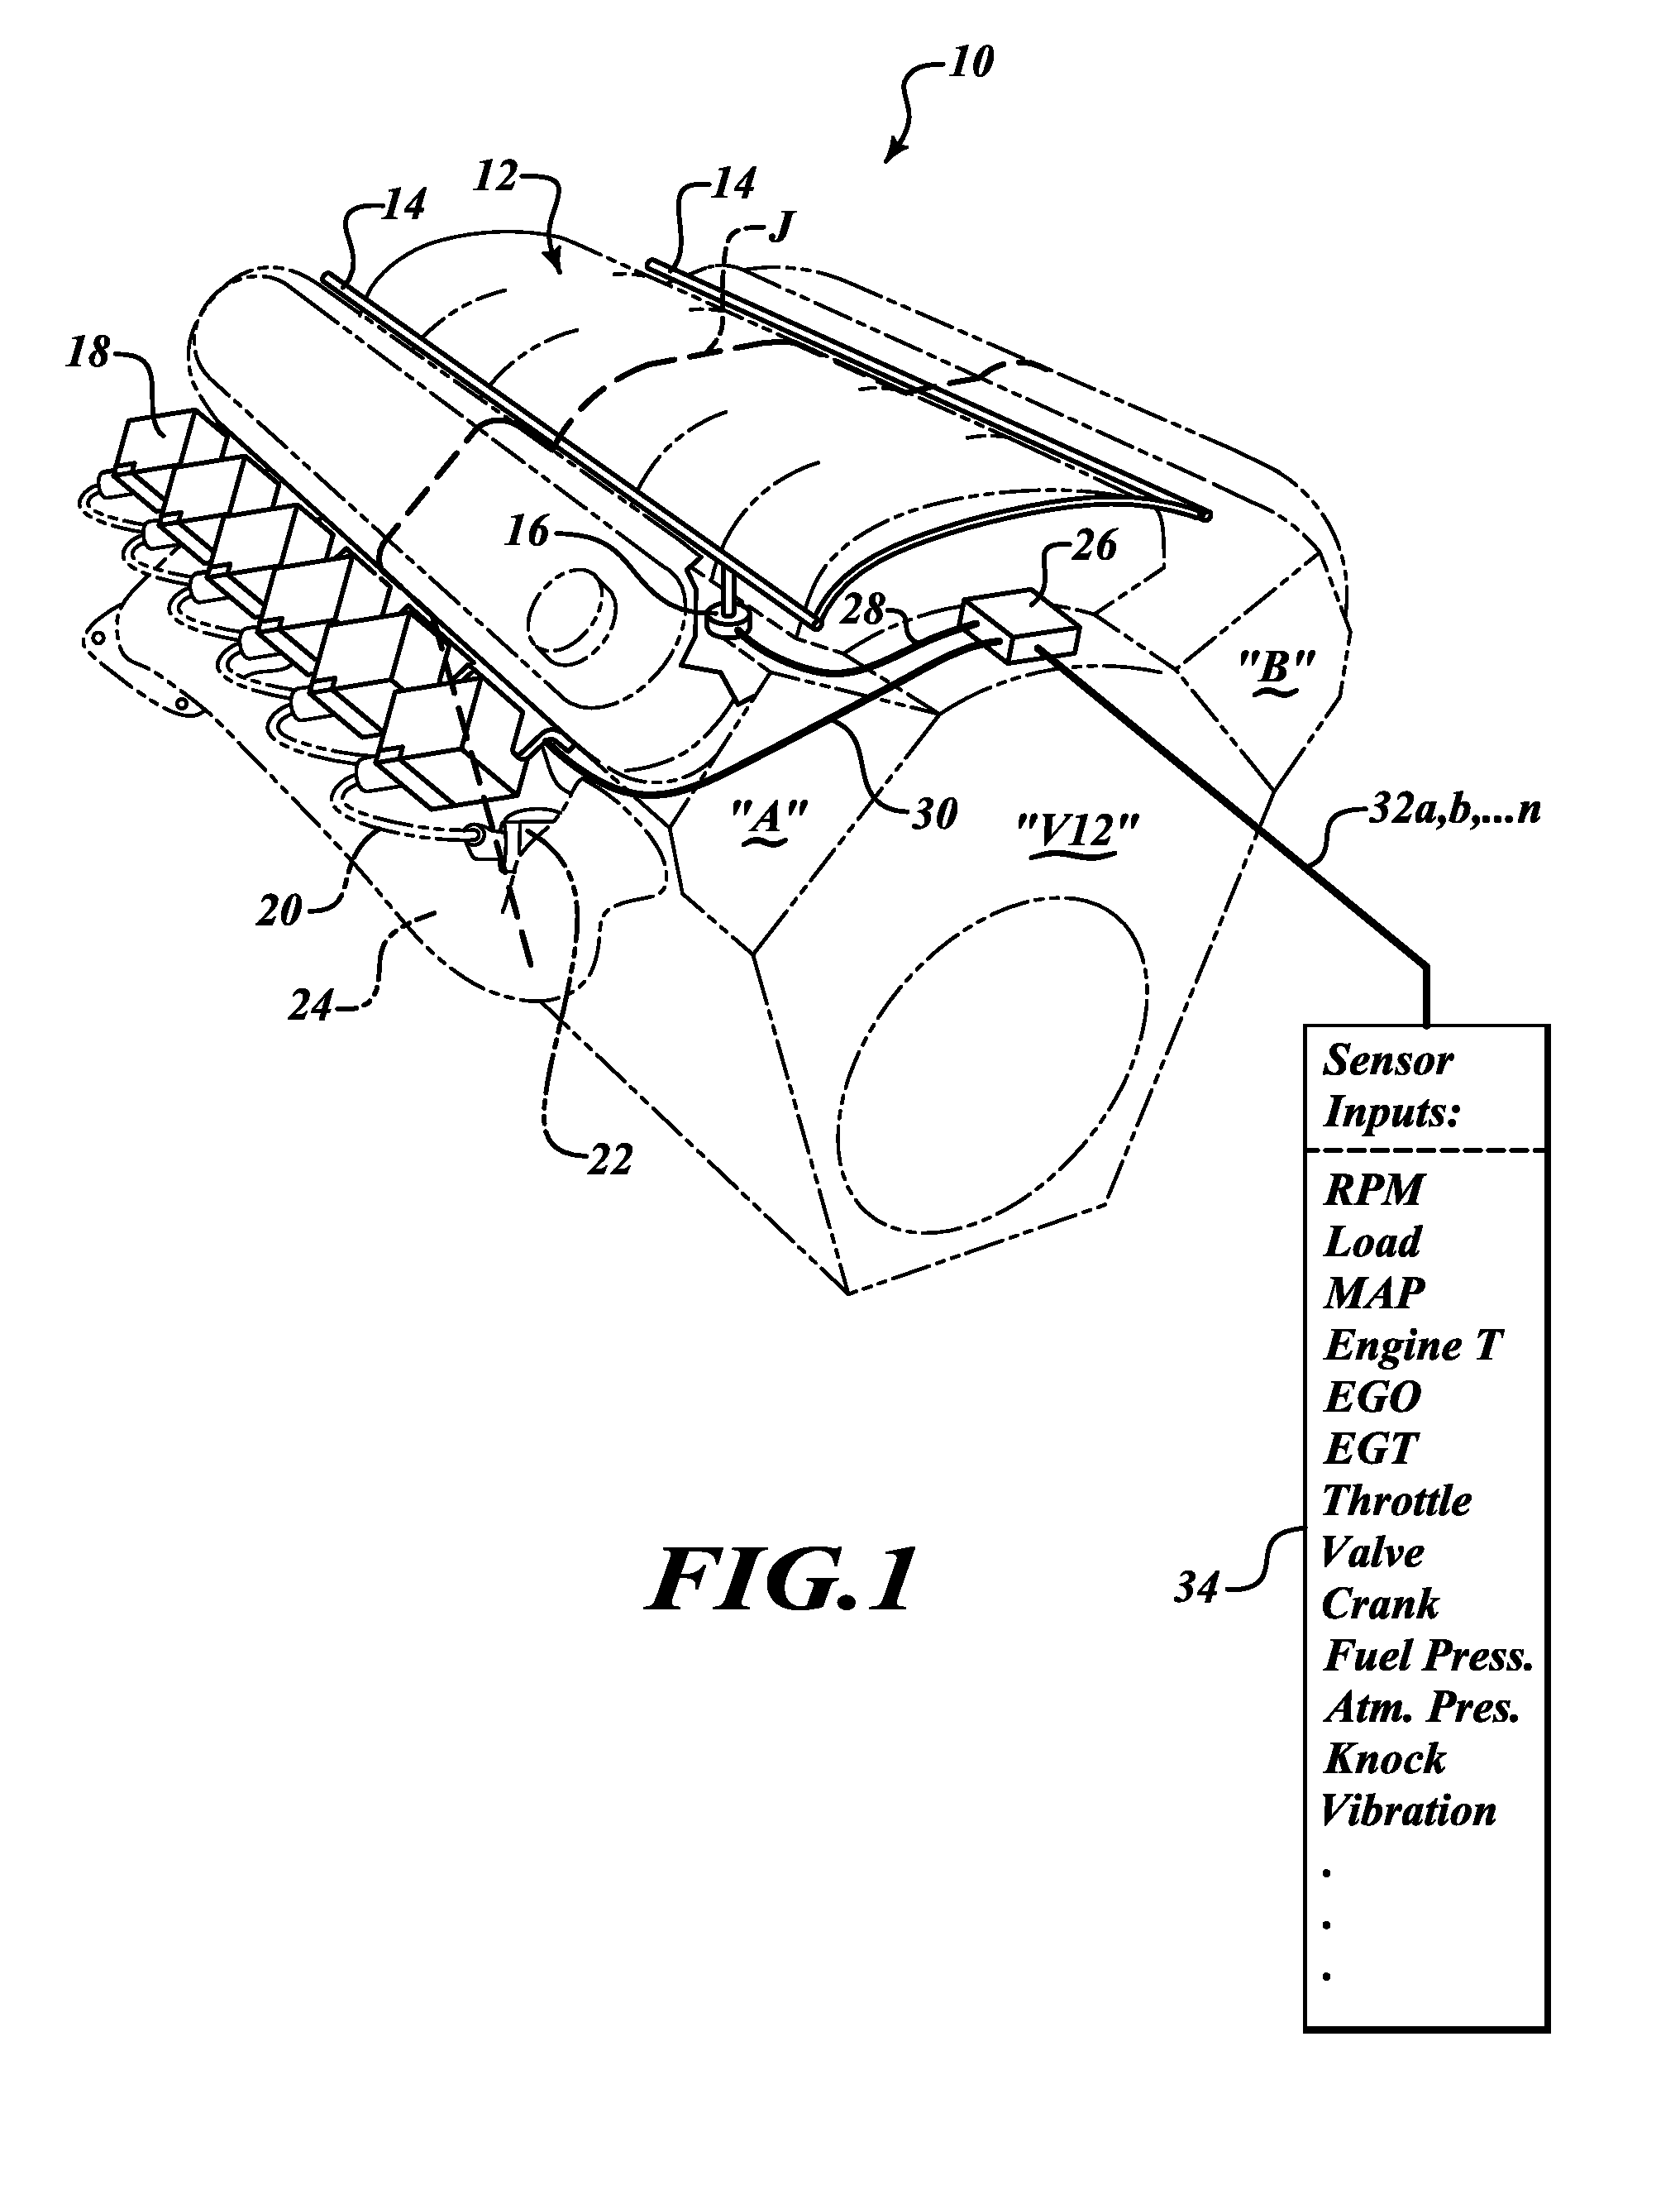 Even fire 90a°v12 IC engines, fueling and firing sequence controllers, and methods of operation by ps/p technology and ifr compensation by fuel feed control